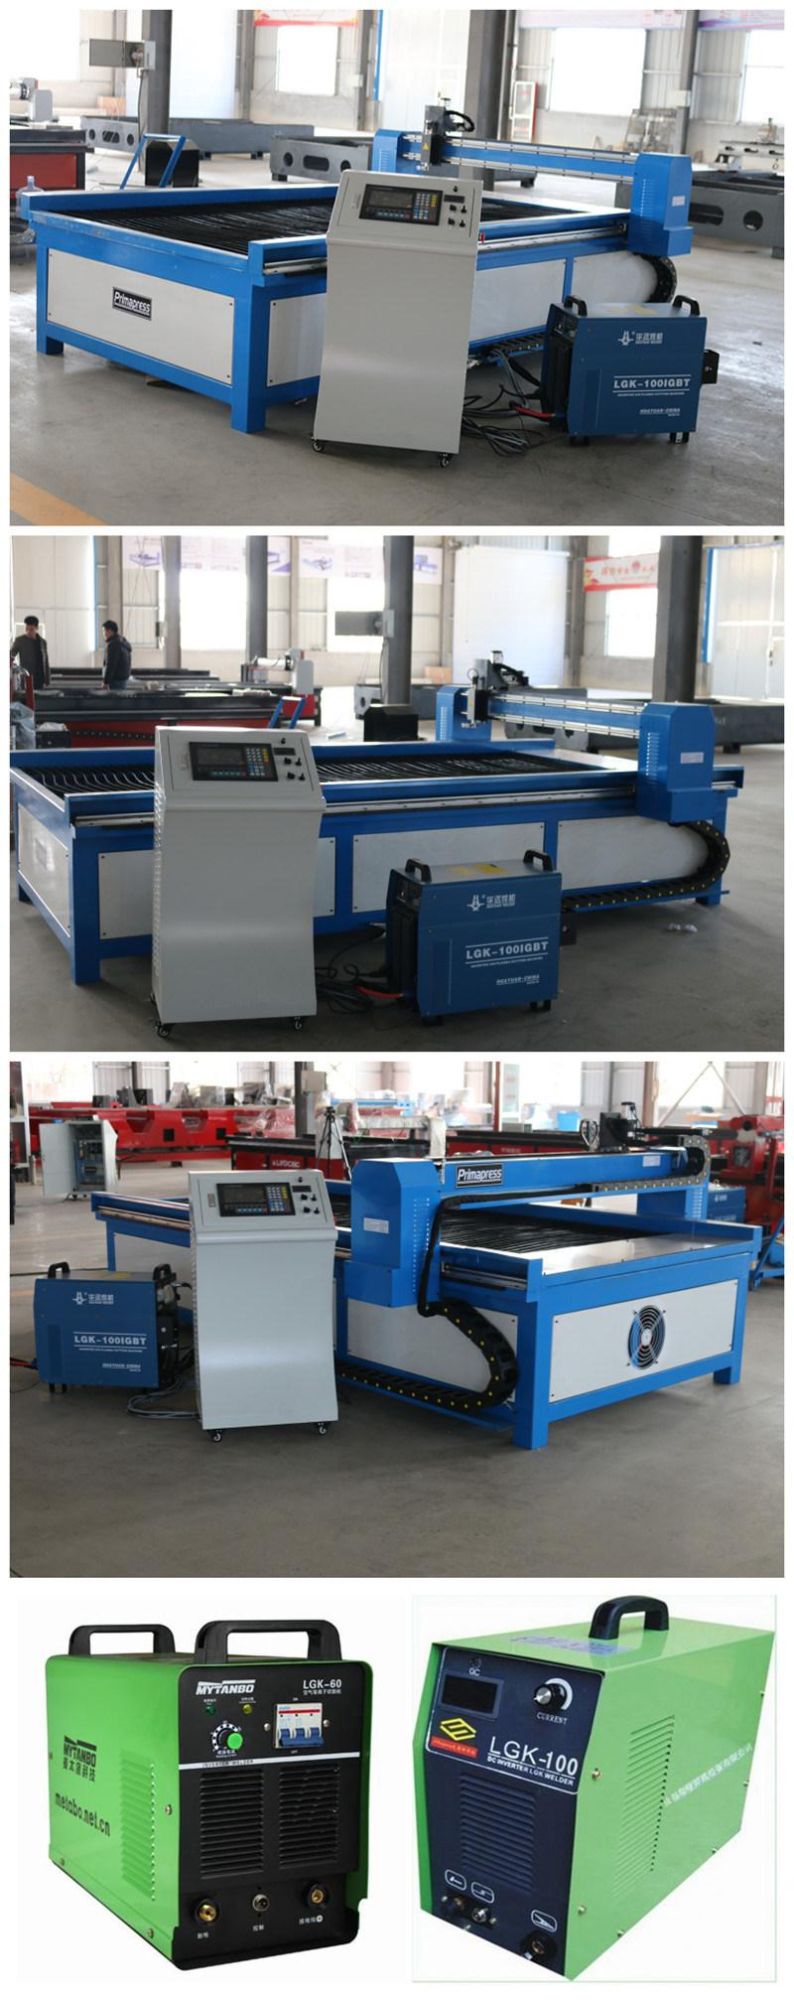 2019 Hot Sale Discount Metal Cutting Machine Processing 3-15mm Stainless Steel